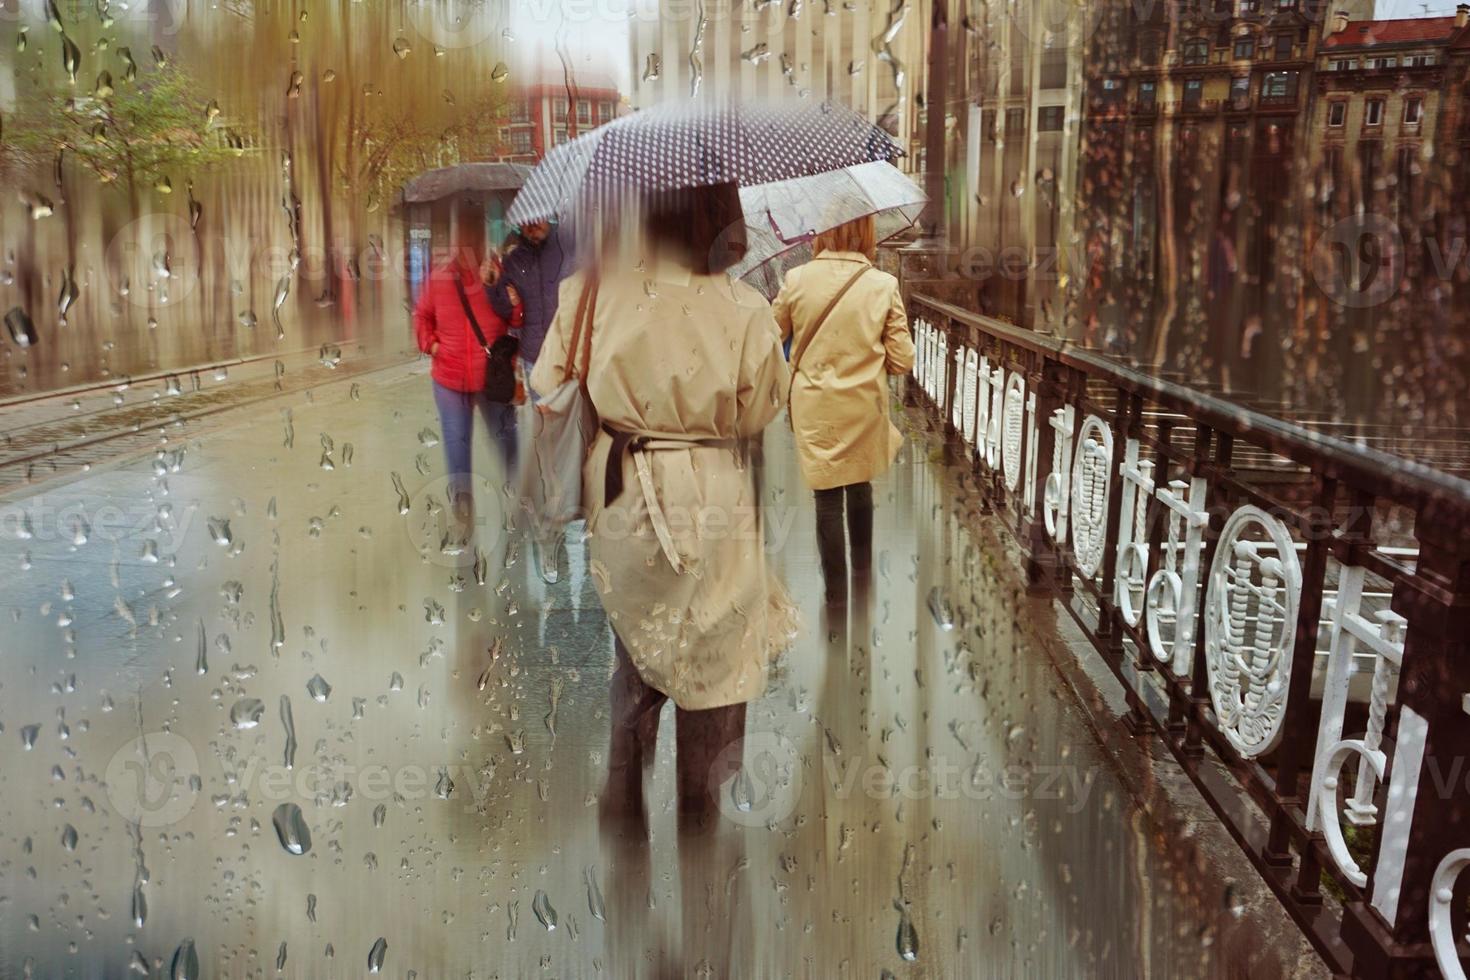 people with an umbrella in rainy days in winter season, bilbao, basque country, spain photo